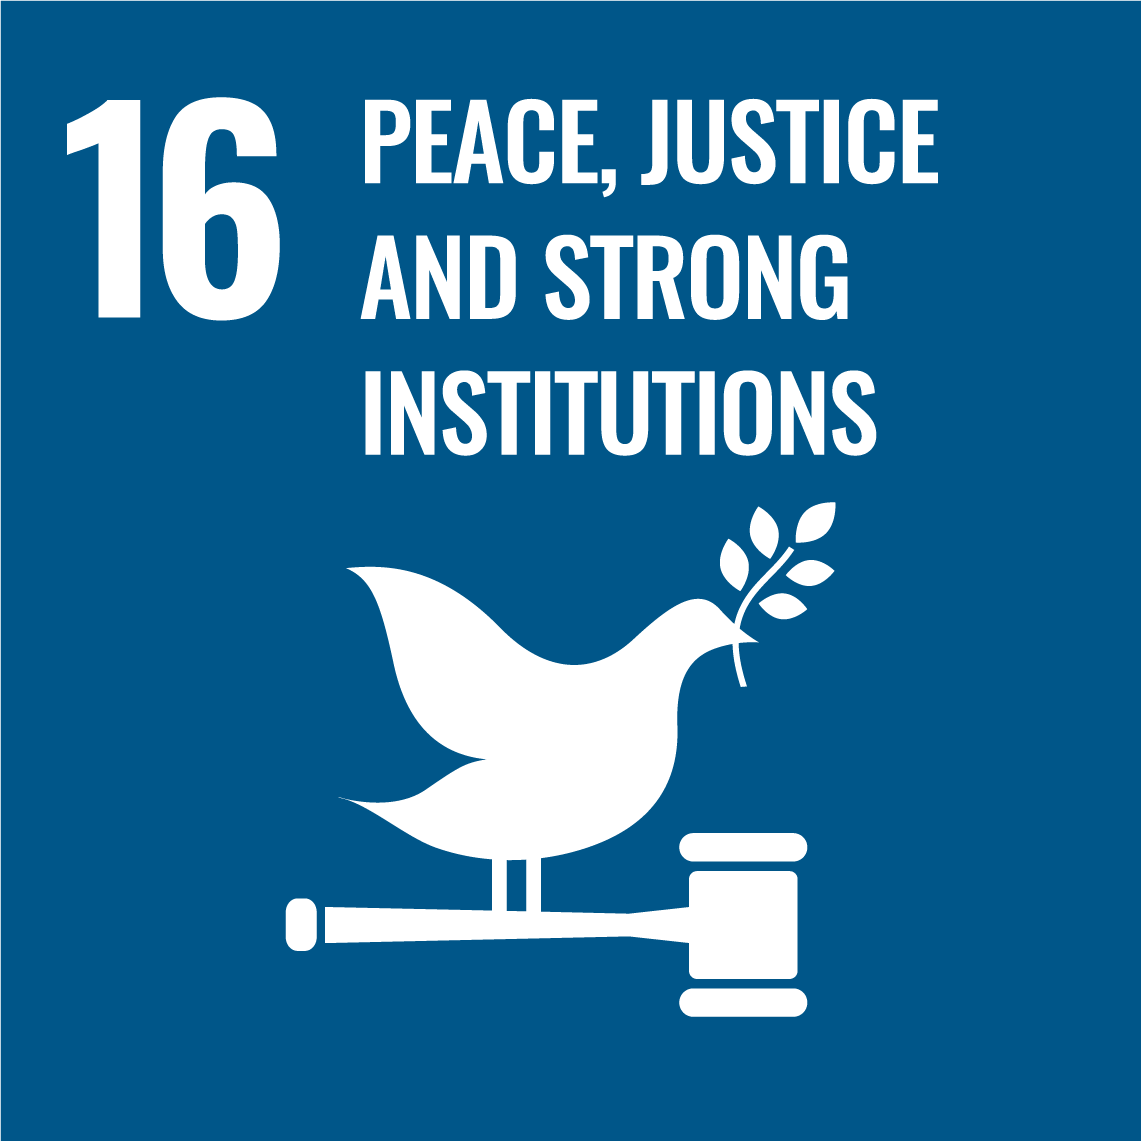 Sustainable Development Goals 16 - Peace, justice and strong institutions